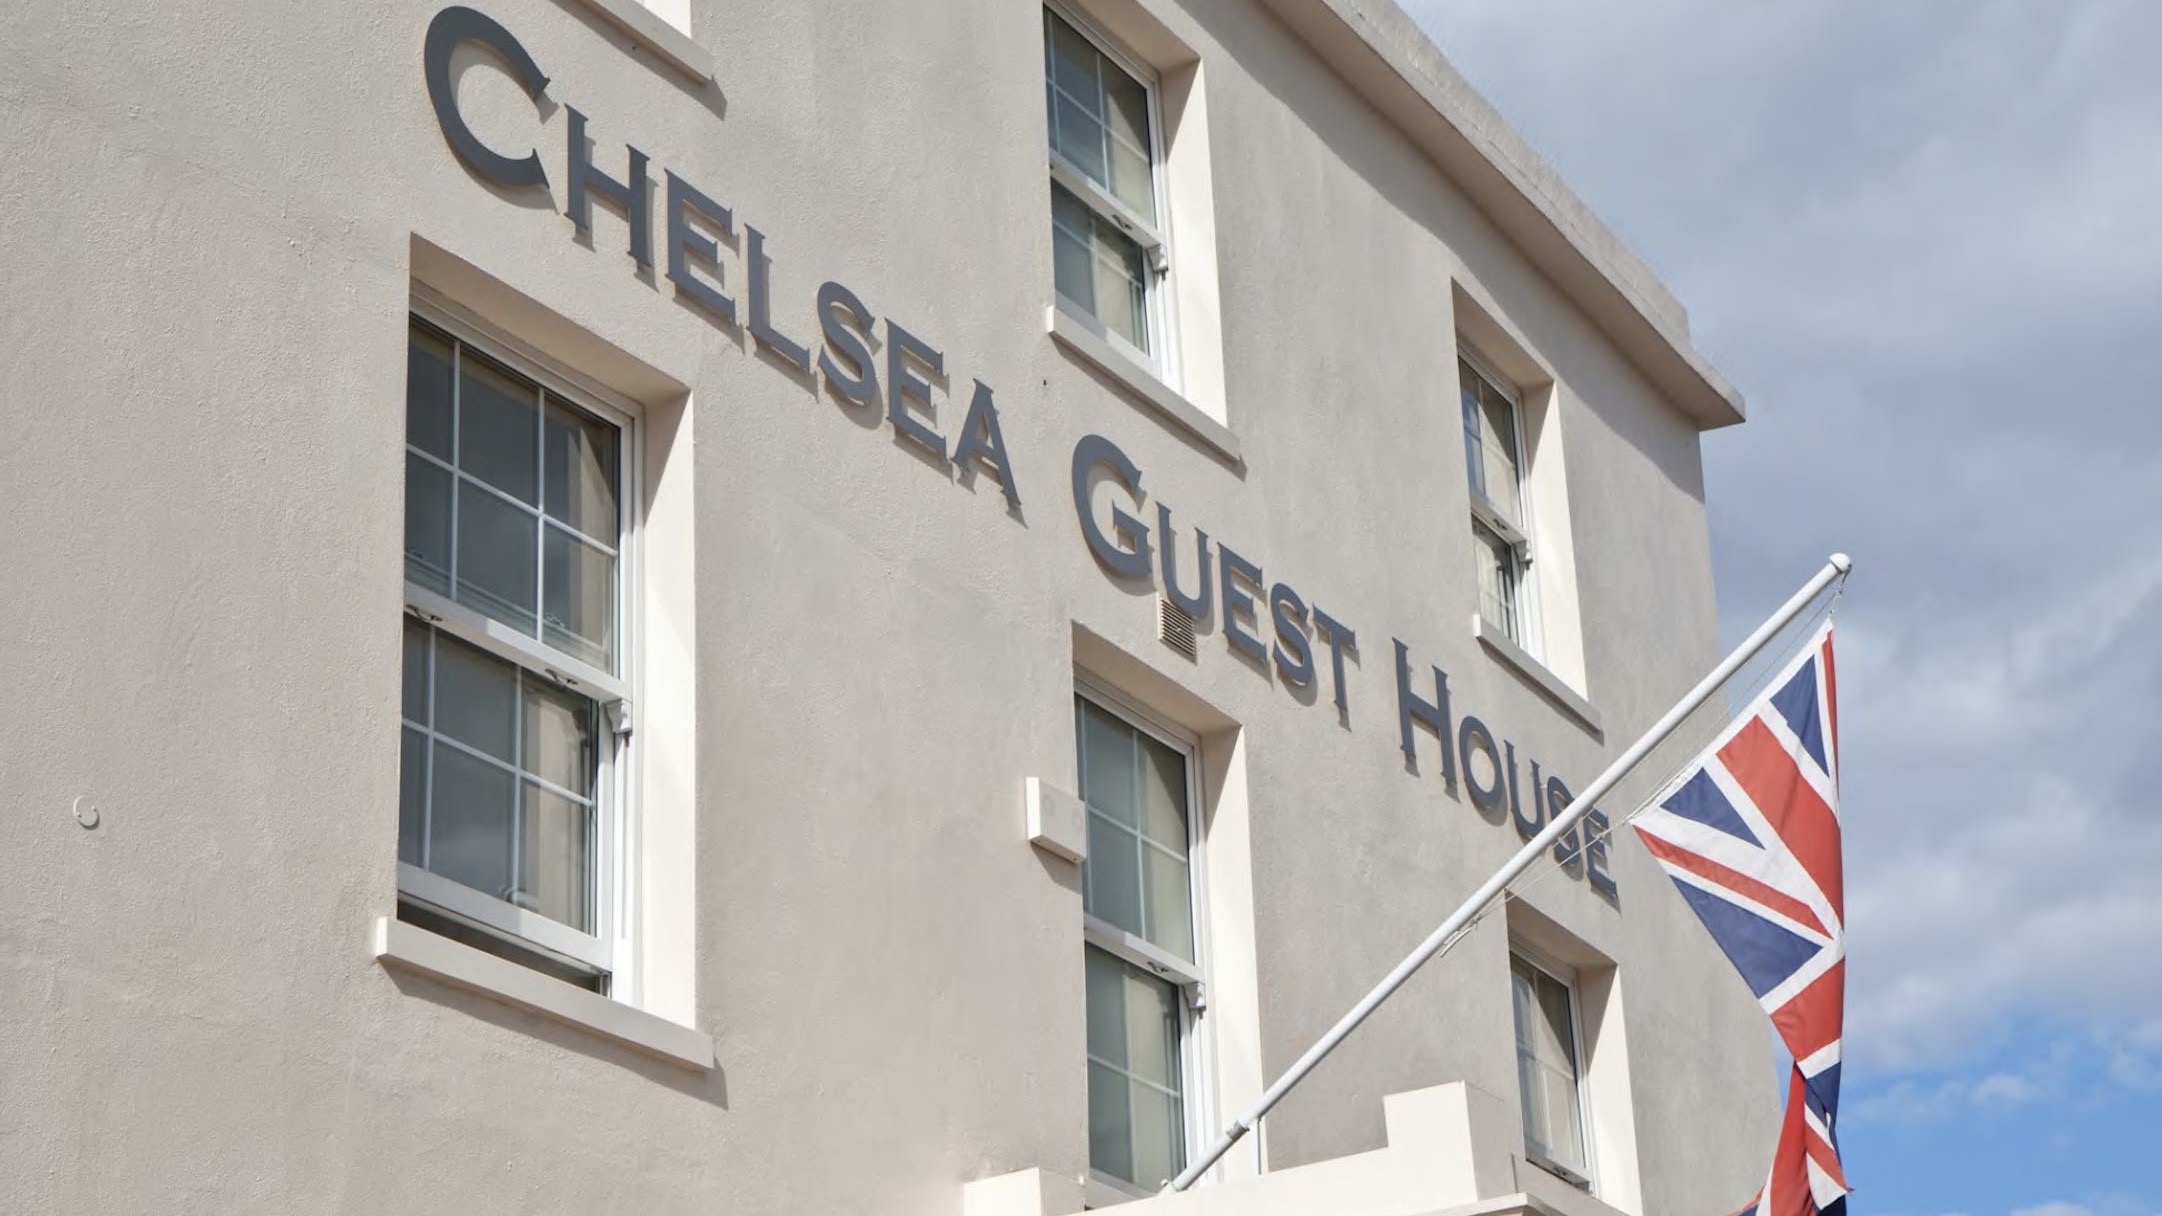 Chelsea guesthouse